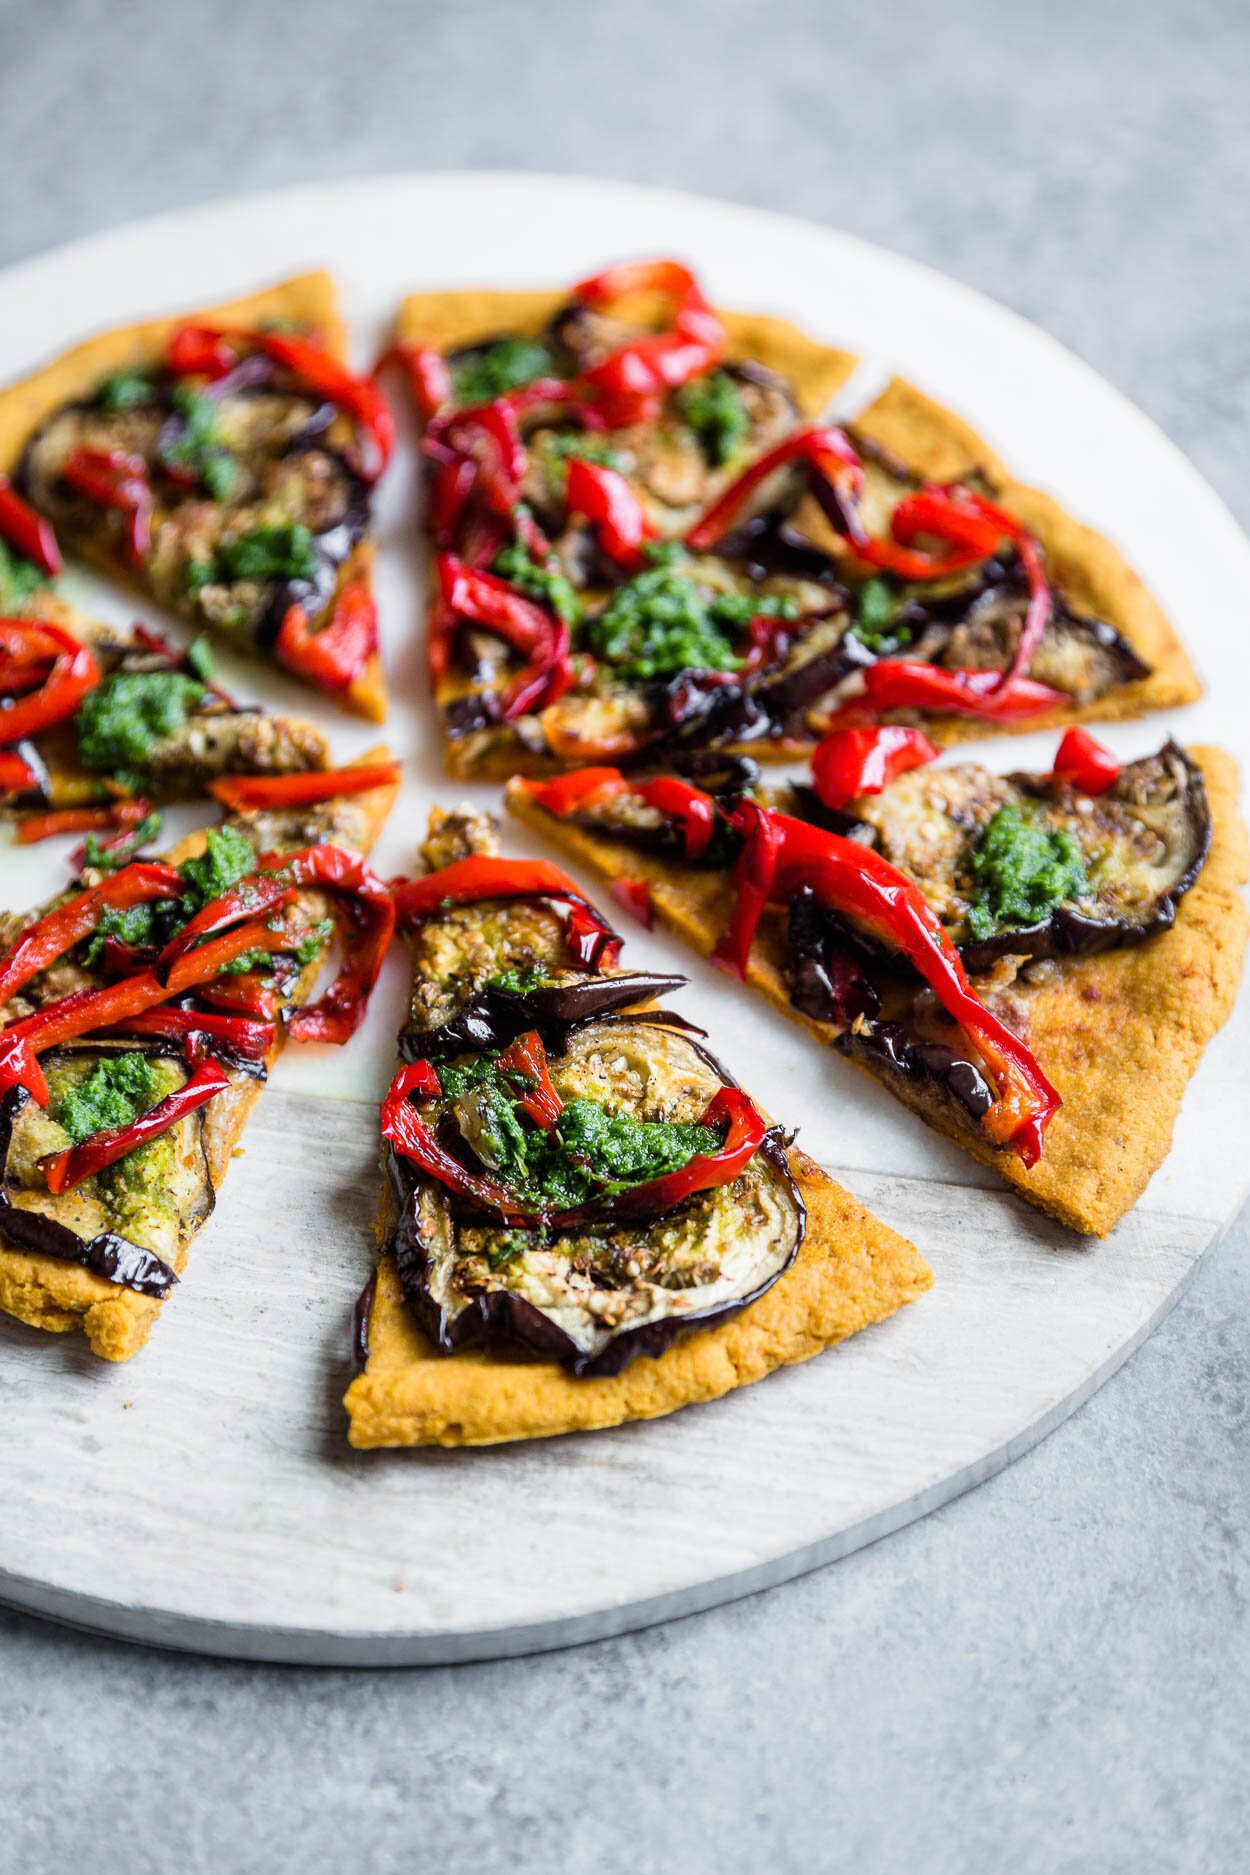 Sweet Potato Crust Pizza with Roasted Eggplant &amp; Bell Peppers